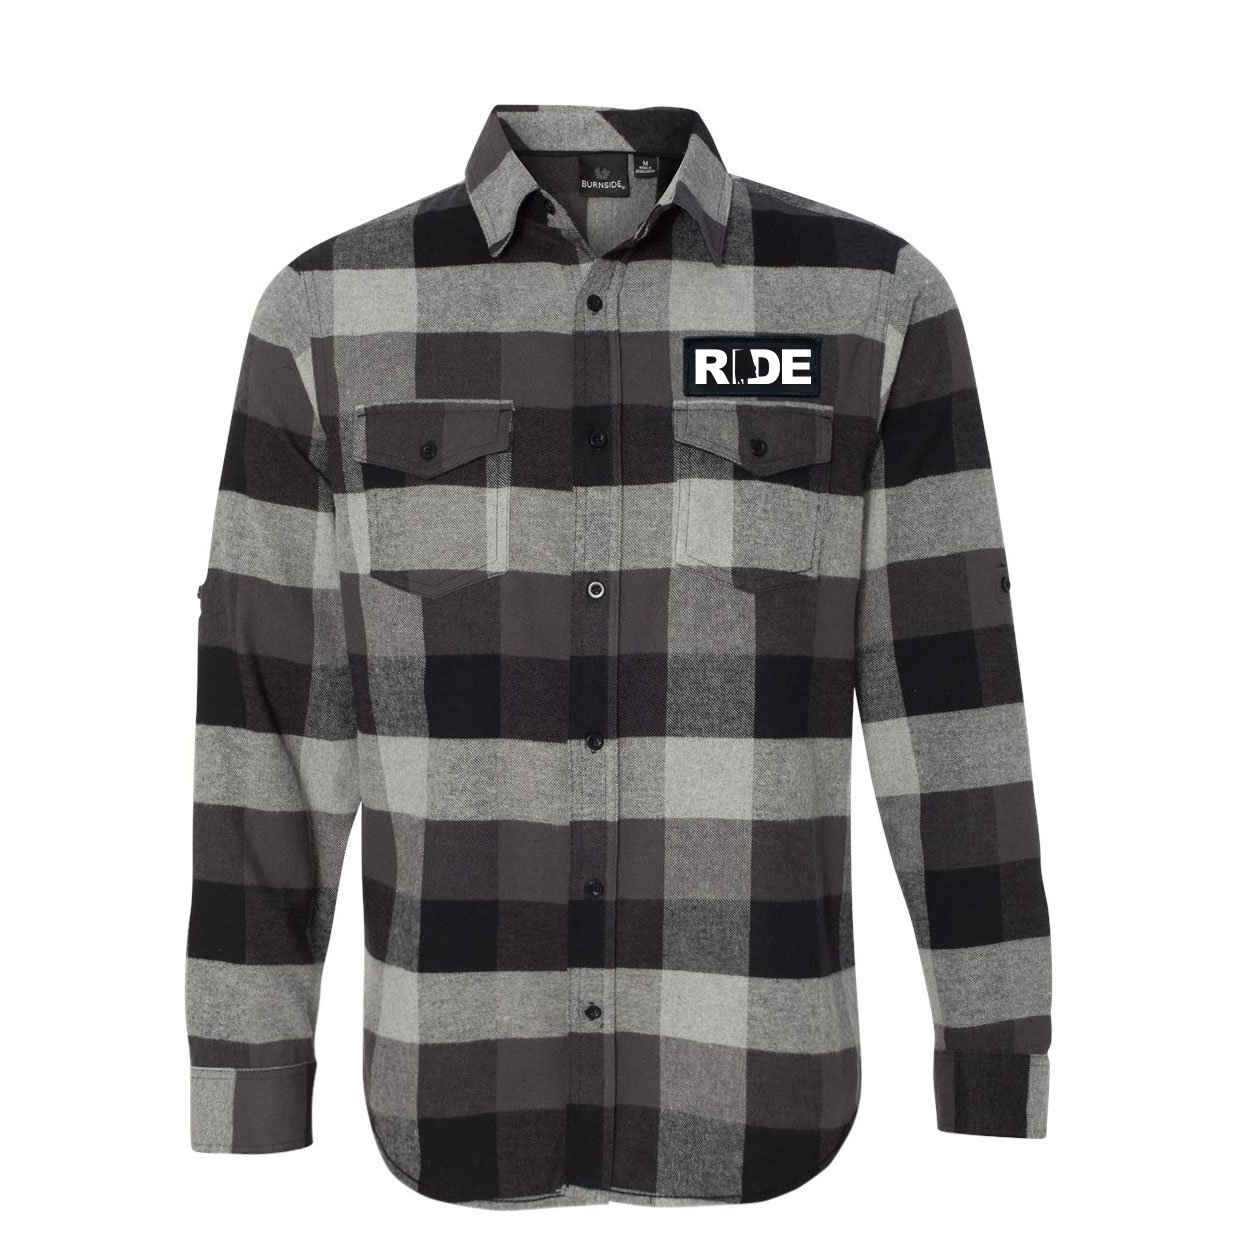 Ride Alabama Classic Unisex Long Sleeve Woven Patch Flannel Shirt Black/Gray (White Logo)